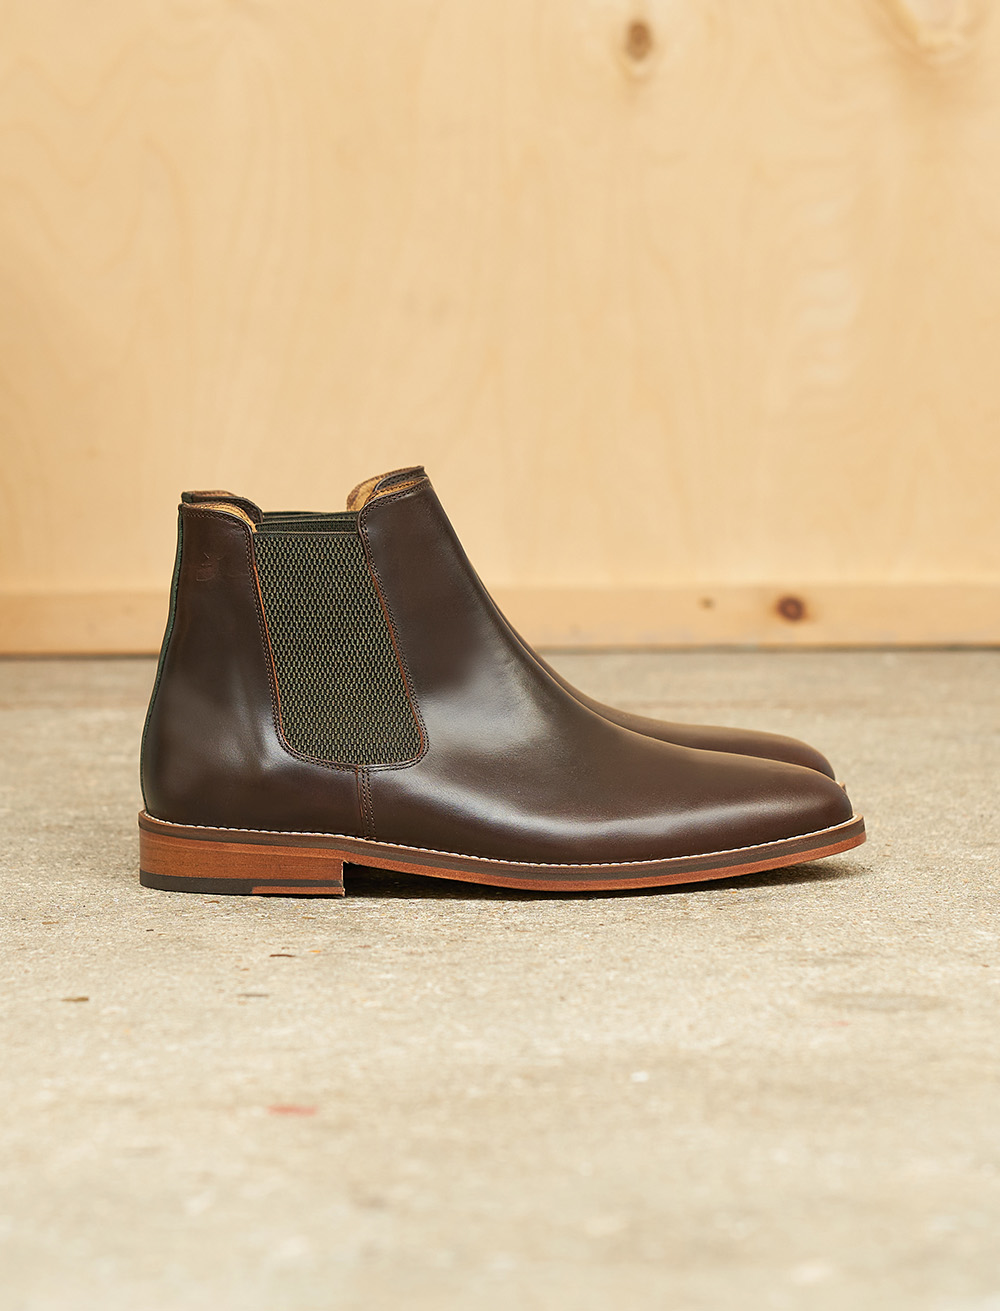 Chelsea Boots - Burgundy and green